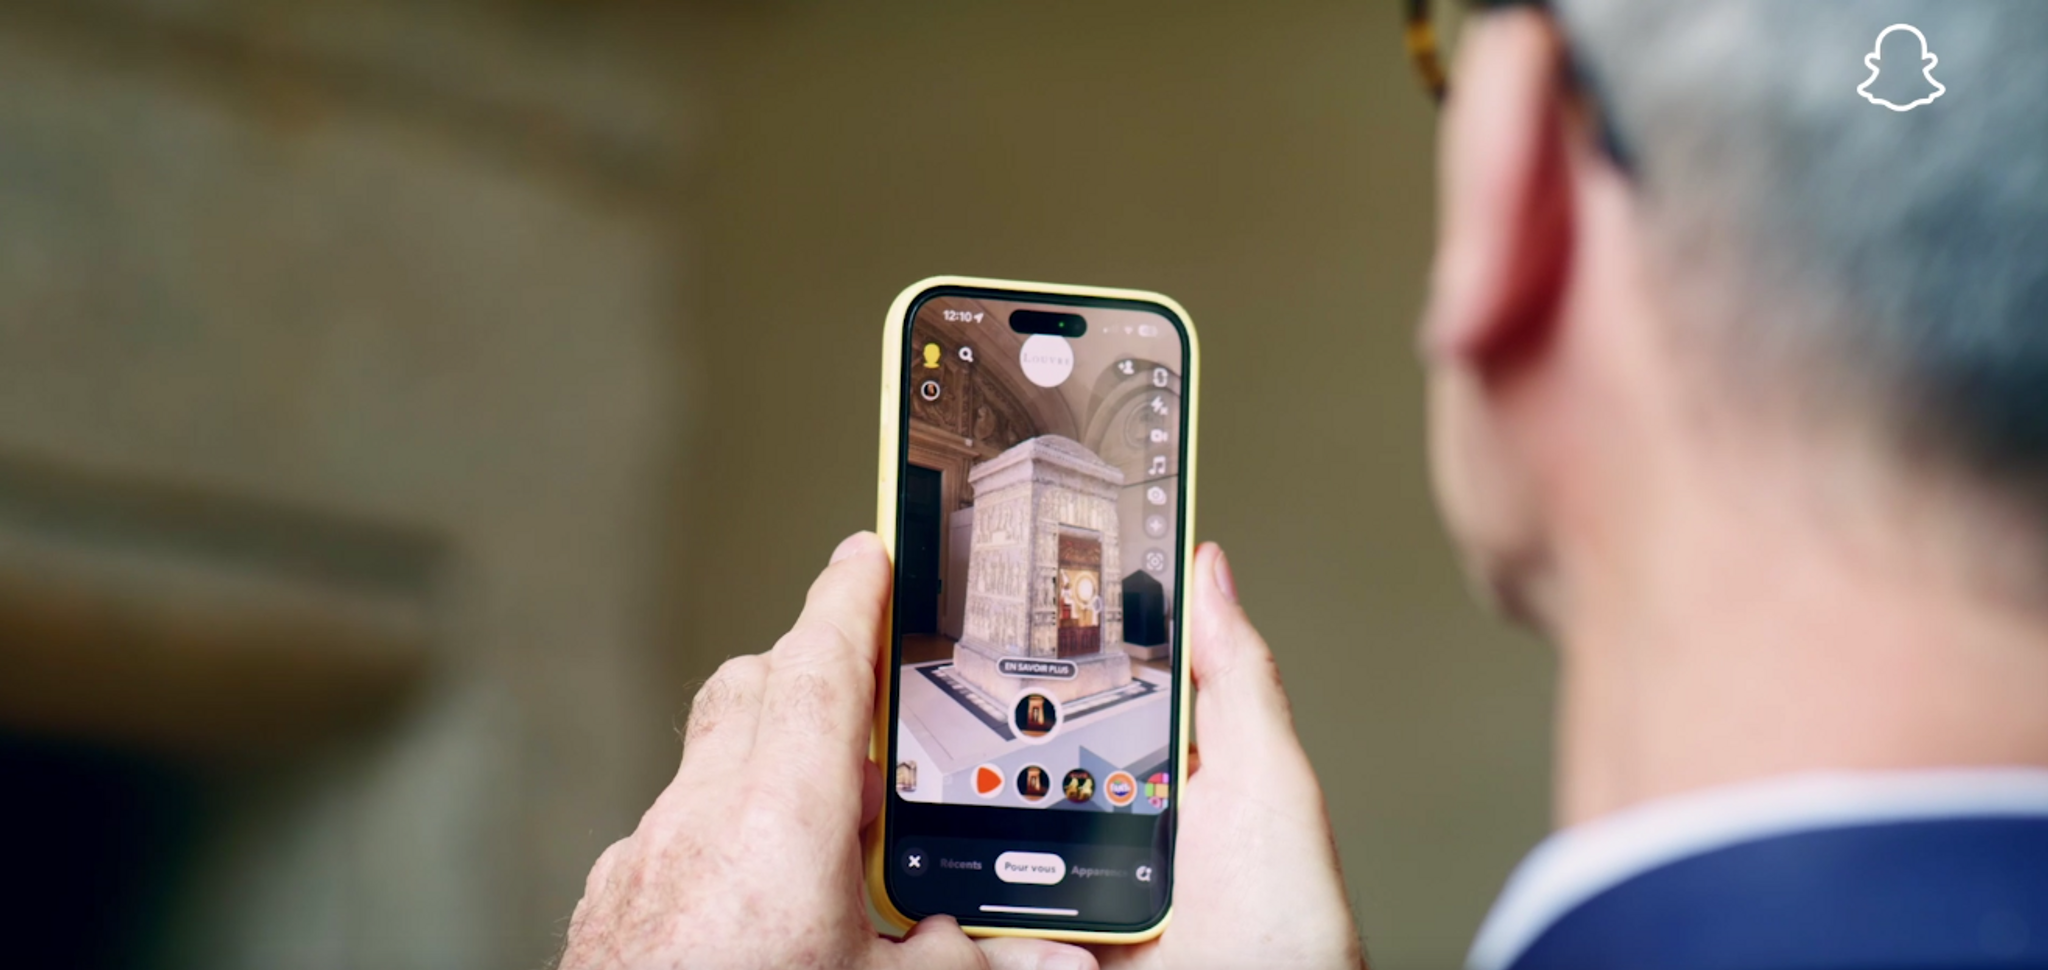 The Louvre adopts Snap tech for immersive AR exhibits